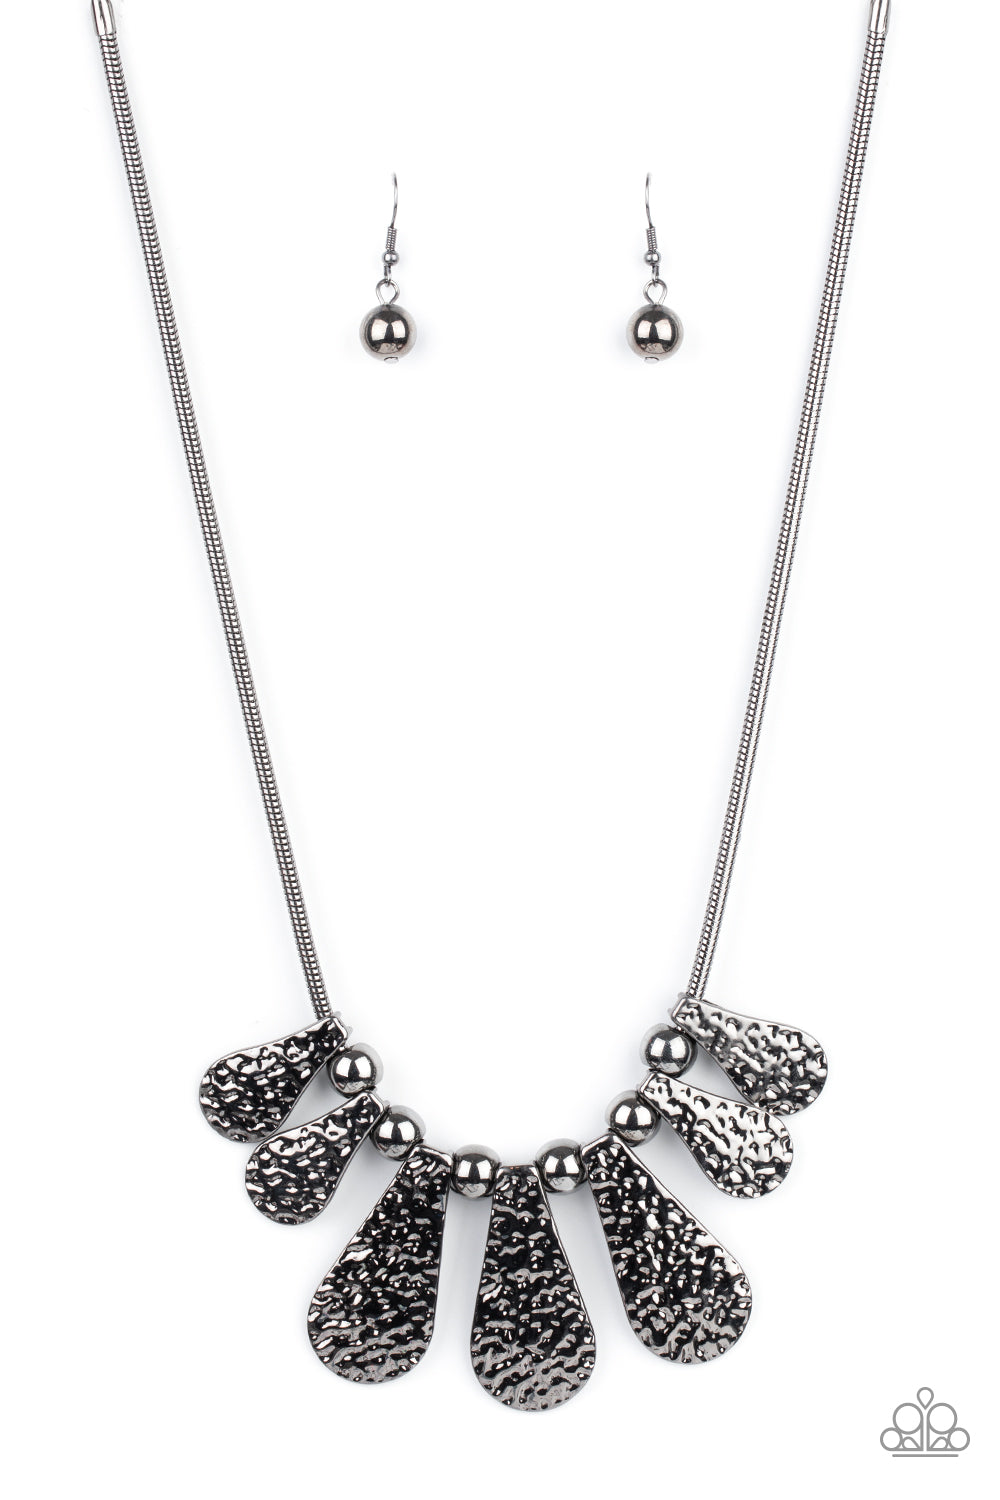 Gallery Goddess - Black Metal - Gunmetal Necklace  - Paparazzi Accessories - Hammered teardrop-like frames and oversized gunmetal beads alternate along a round gunmetal herringbone chain, creating an intense industrial inspired fringe below the collar. Features an adjustable clasp closure. Sold as one individual stylish necklace. 